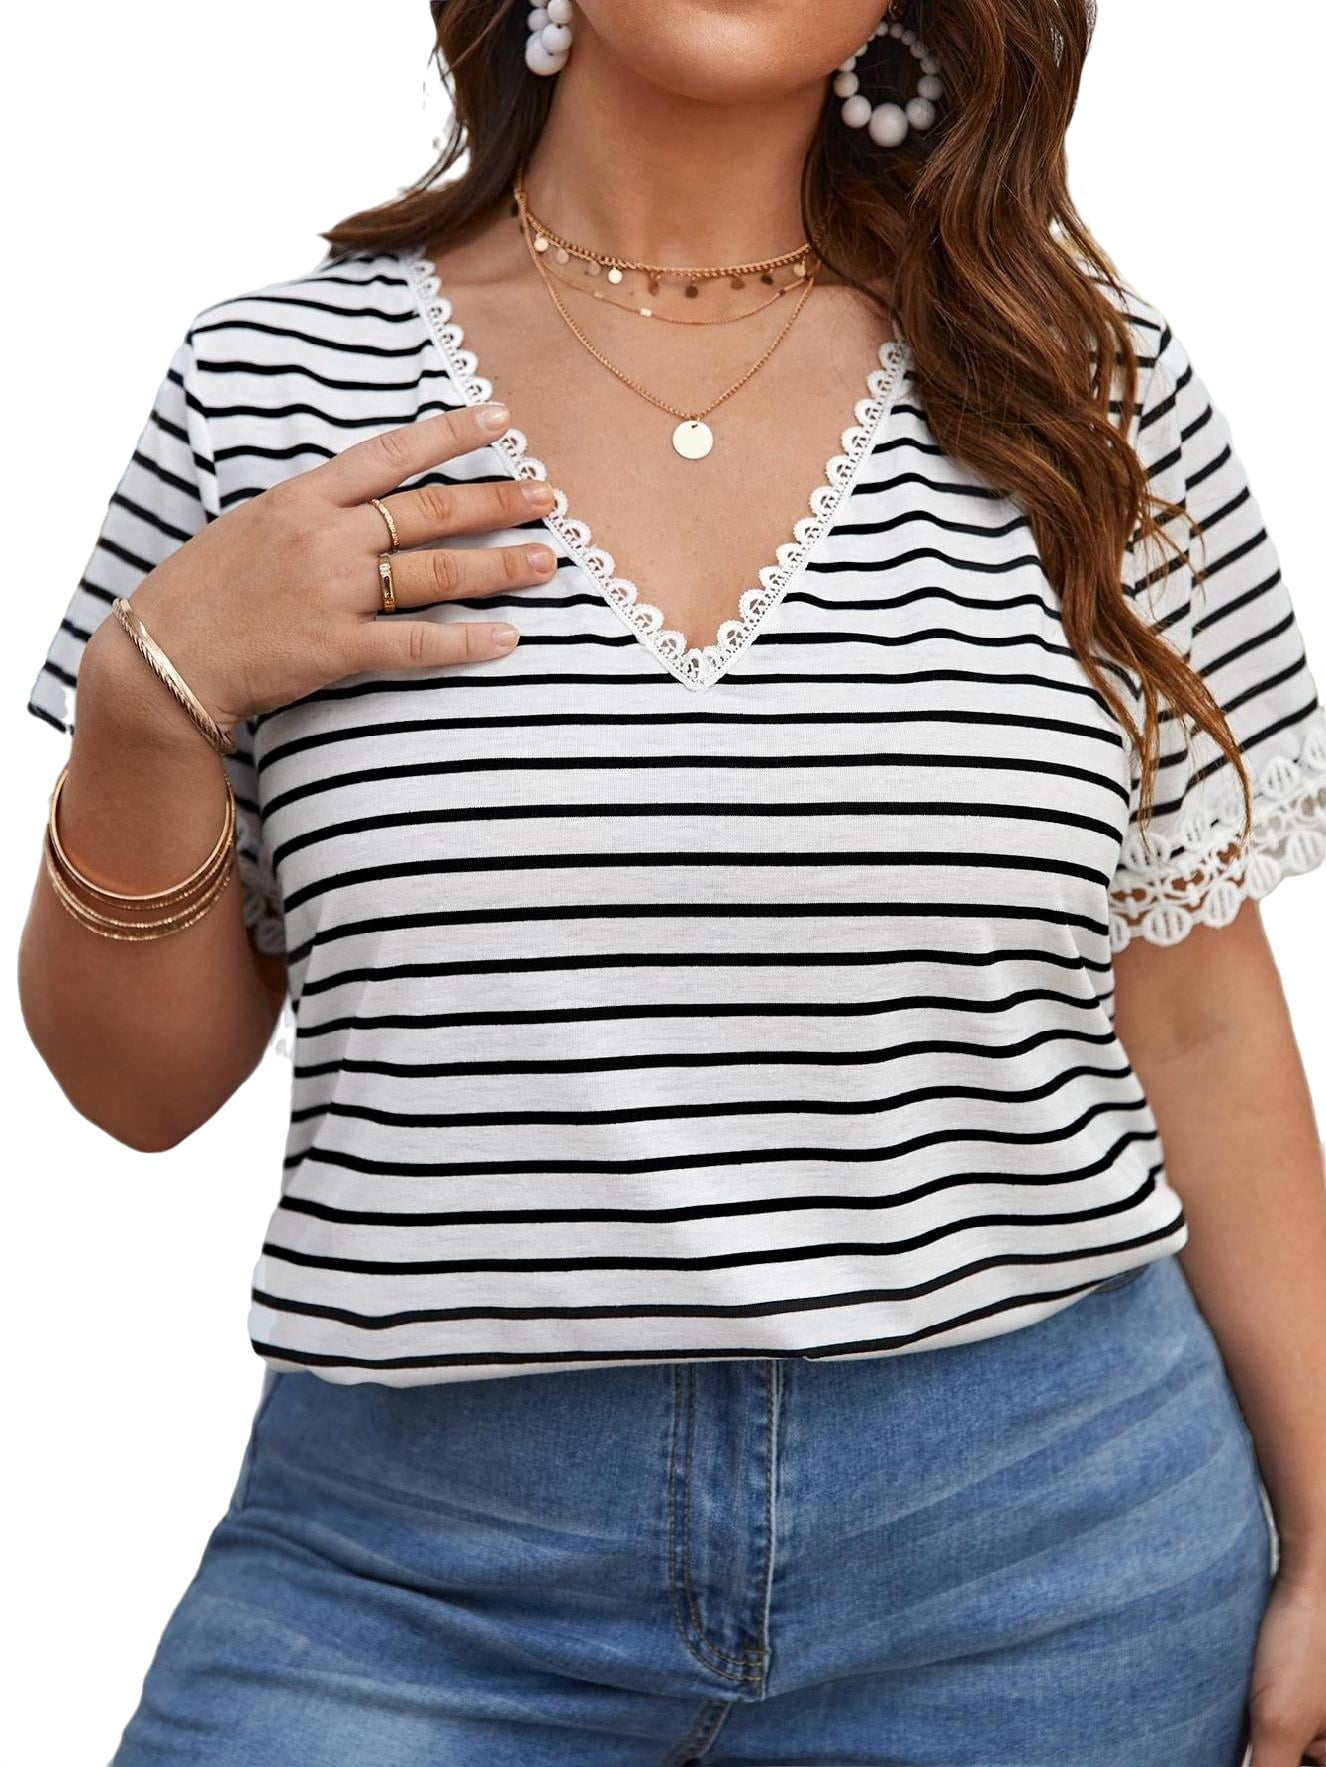 Women's White Striped V neck Casual Short Sleeve Plus Size T-shirts ...